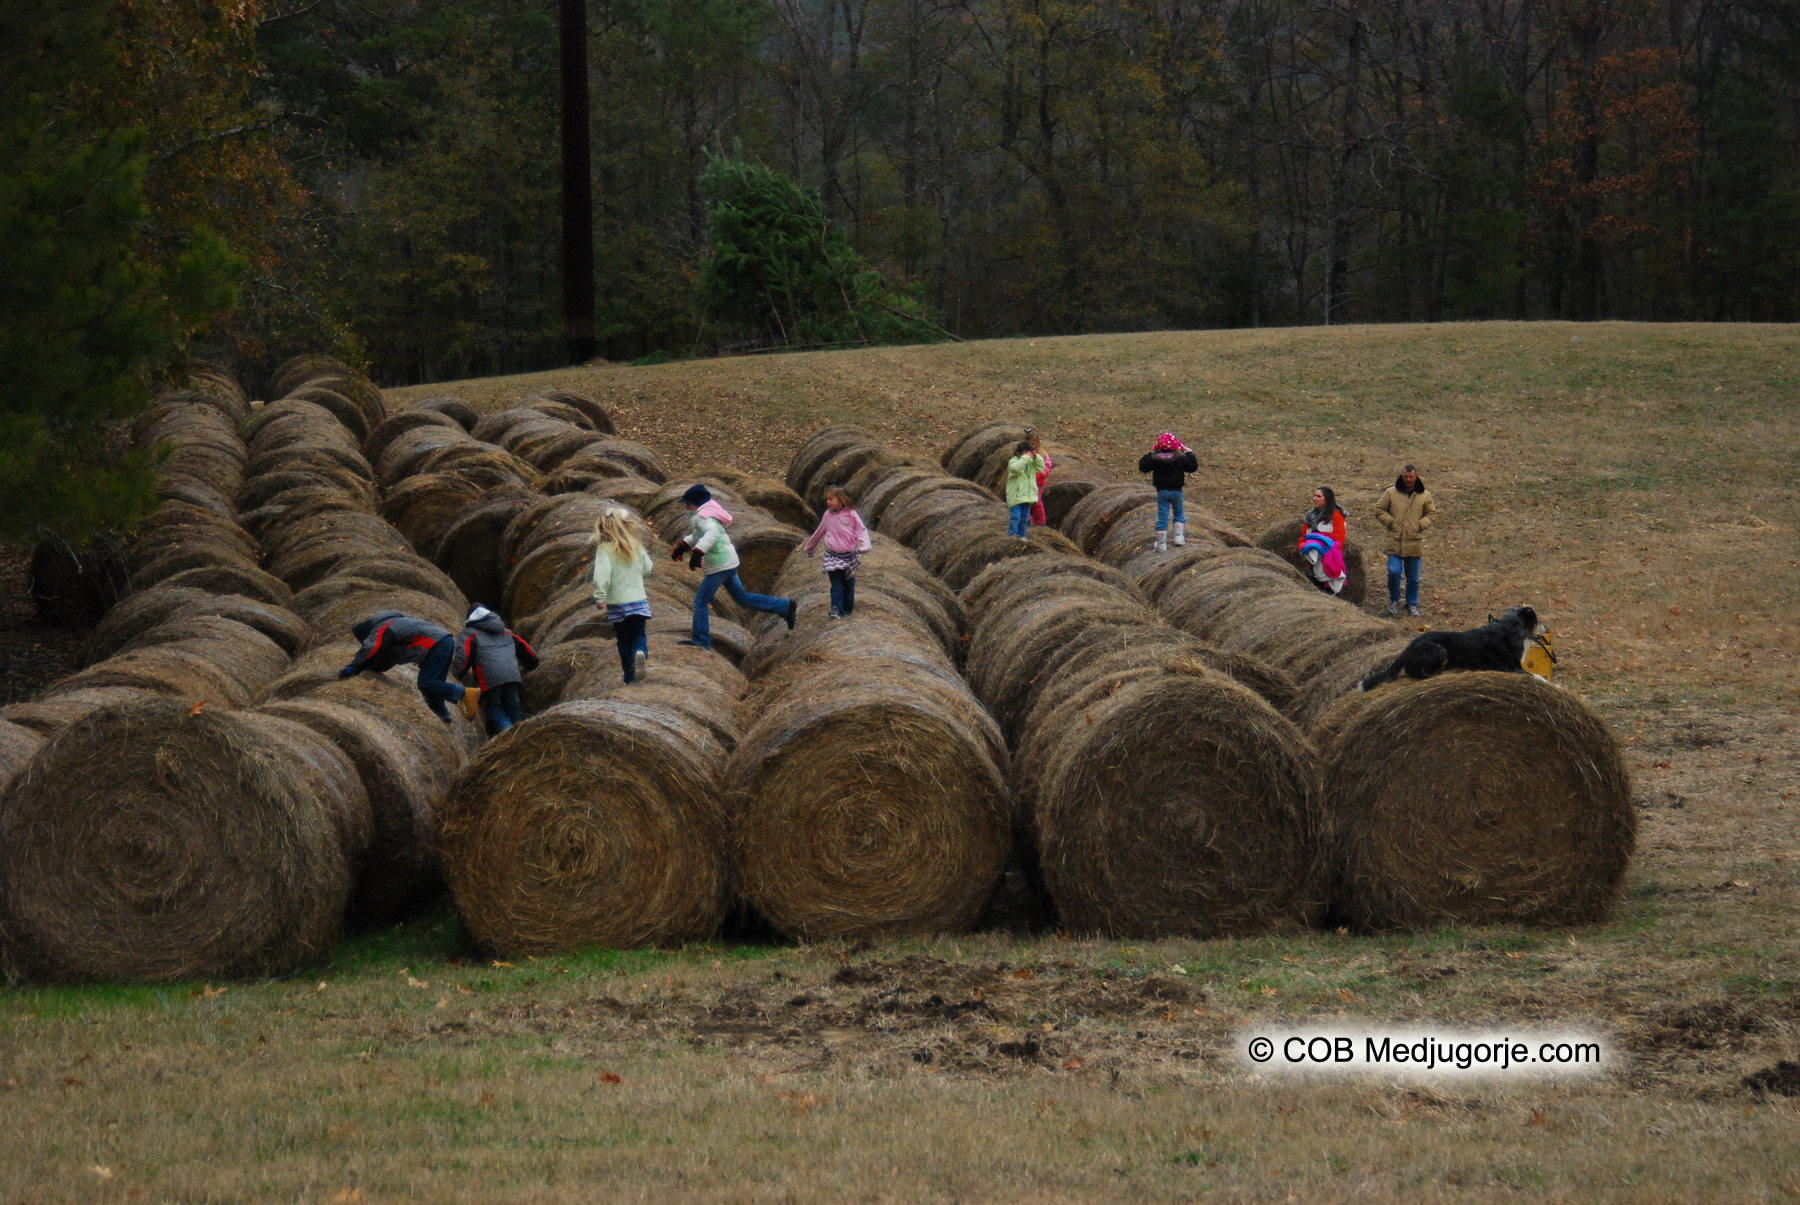 Kids playing on Hay Bales during Rosary December 8, 2010